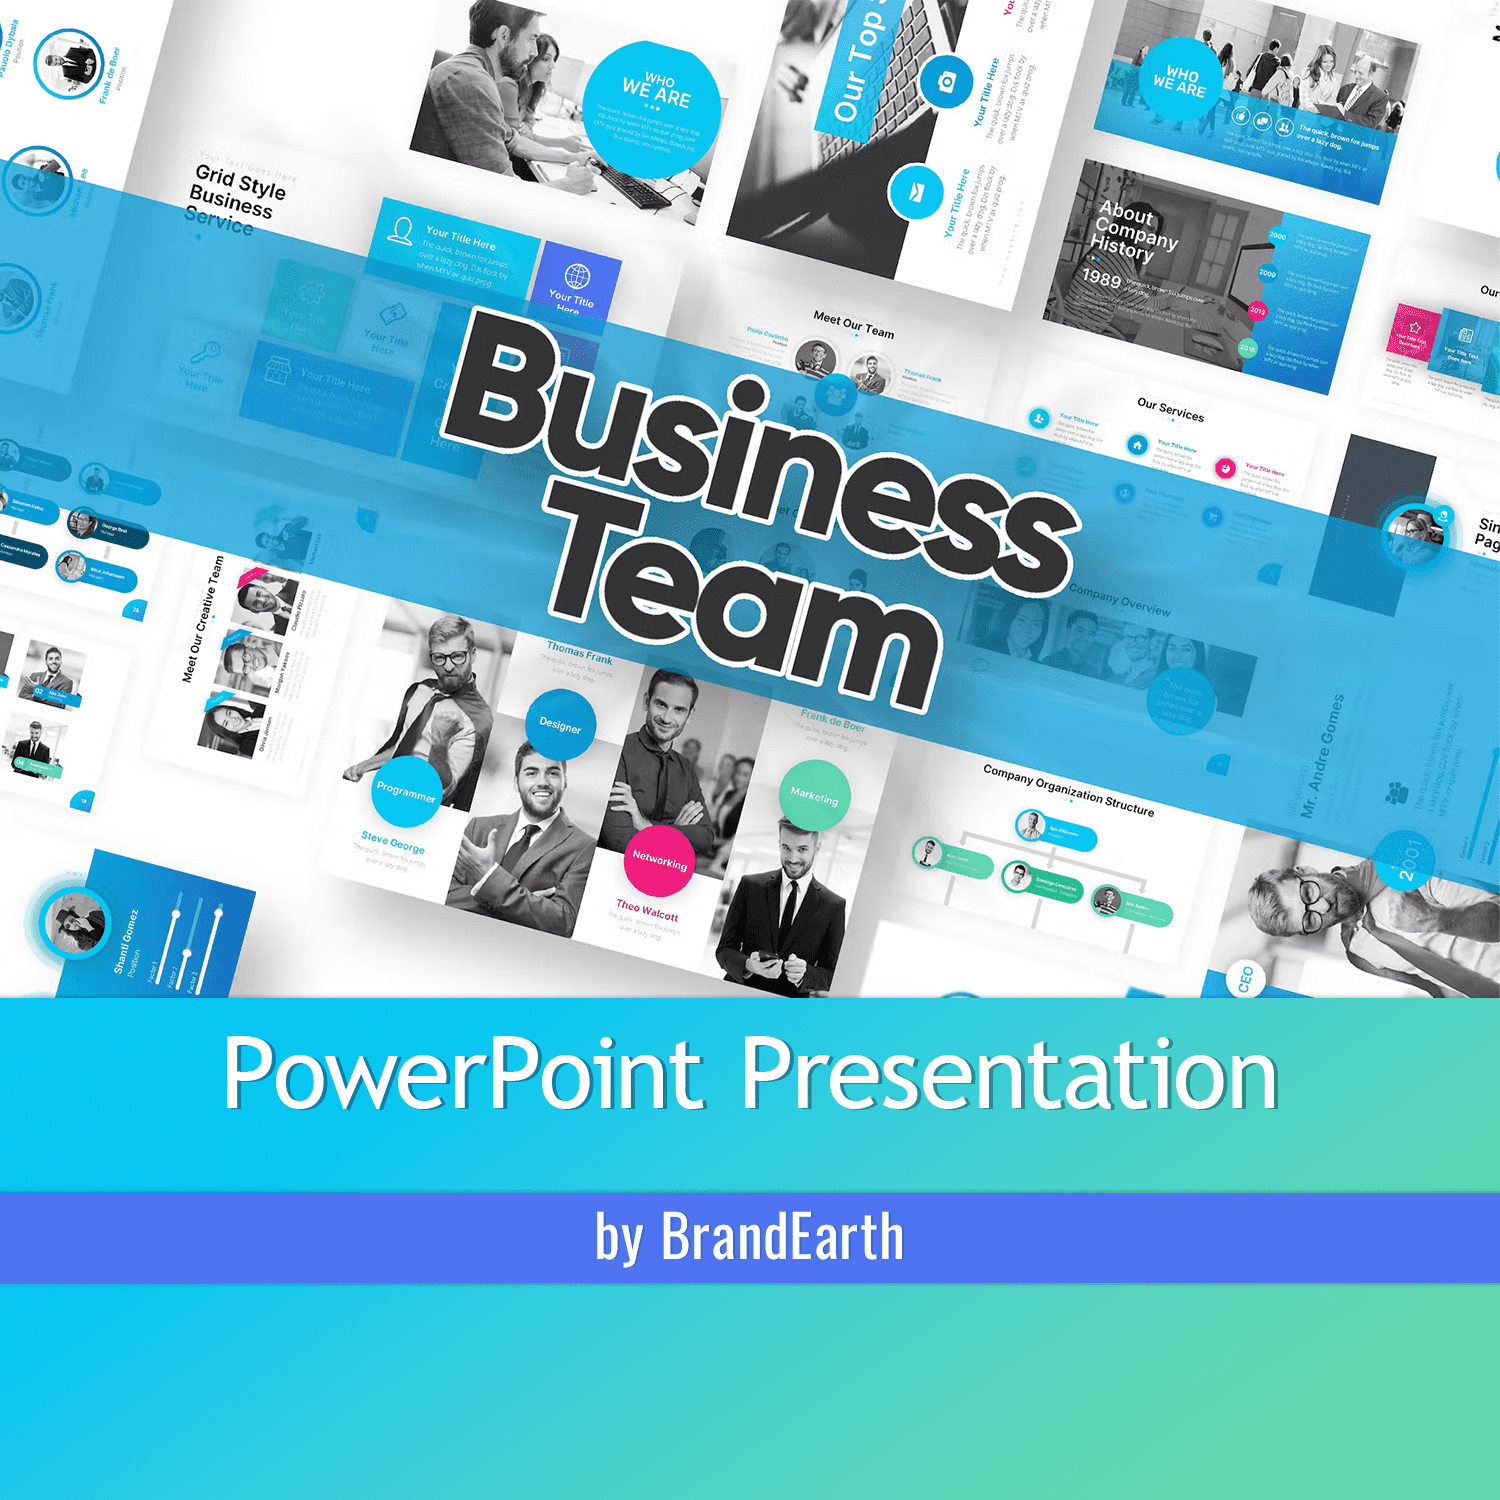 A selection of images of irresistible business team presentation template slides.